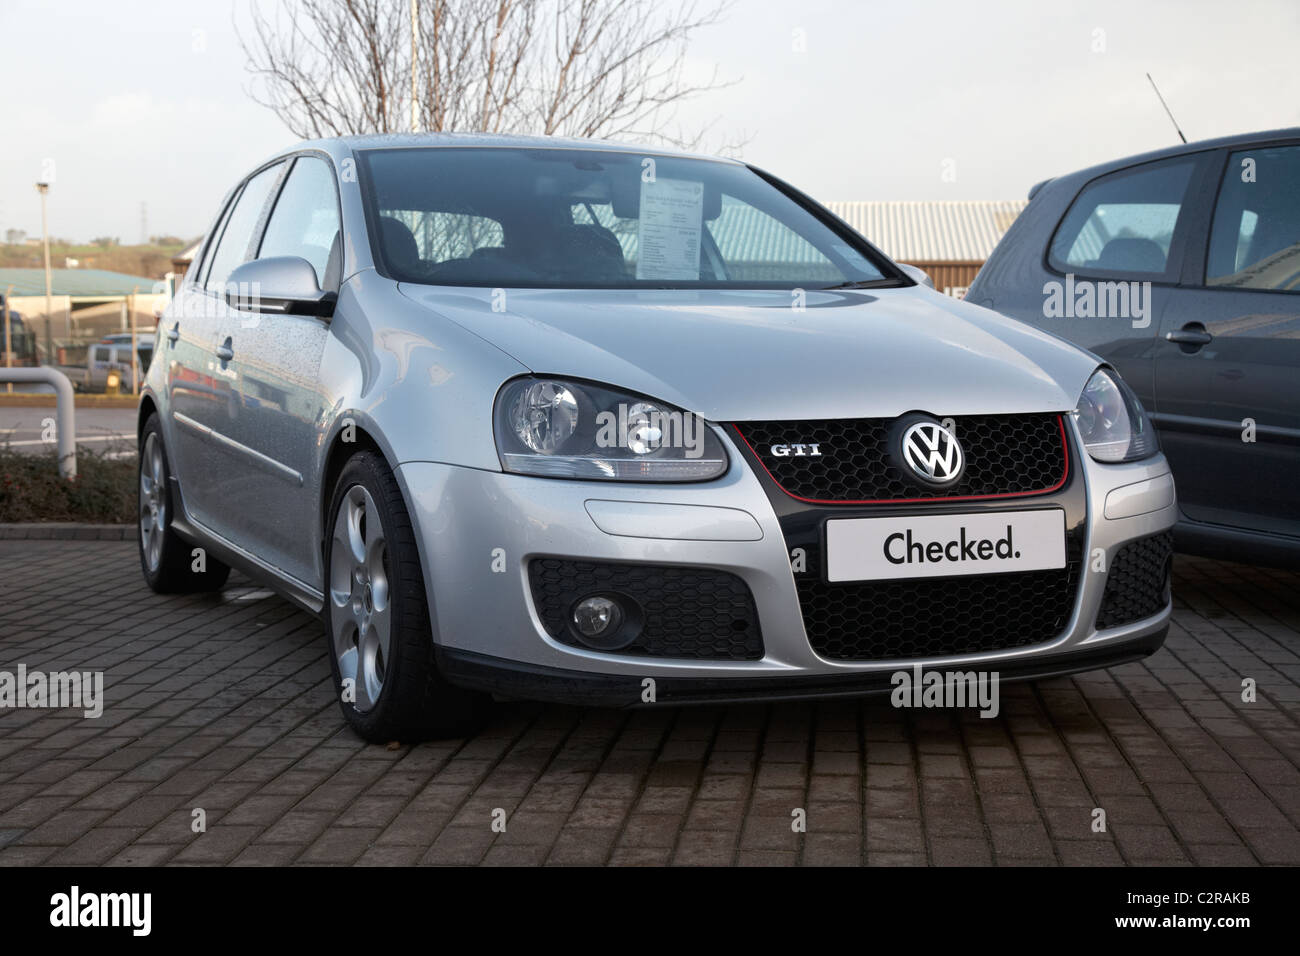 used golf gti approved checked volkswagen used cars on a used car lot in the uk Stock Photo